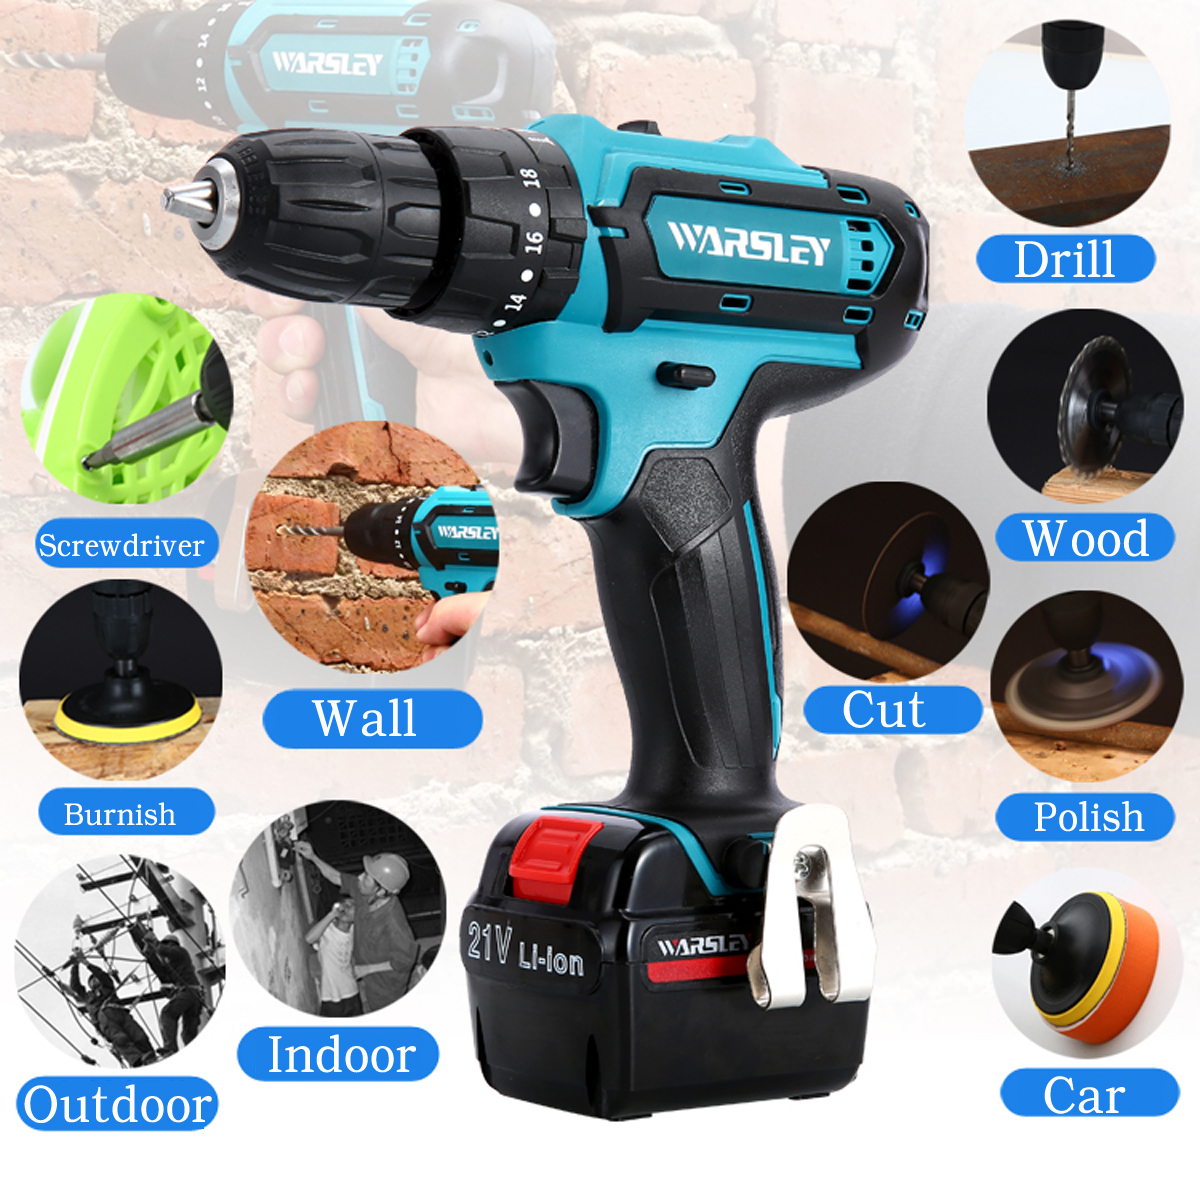 12V-Cordless-Electric-Impact-Drill-Multi-function-Hand-Hammer-Screwdriver-Lithium-Battery-Rechargabl-1452371-10